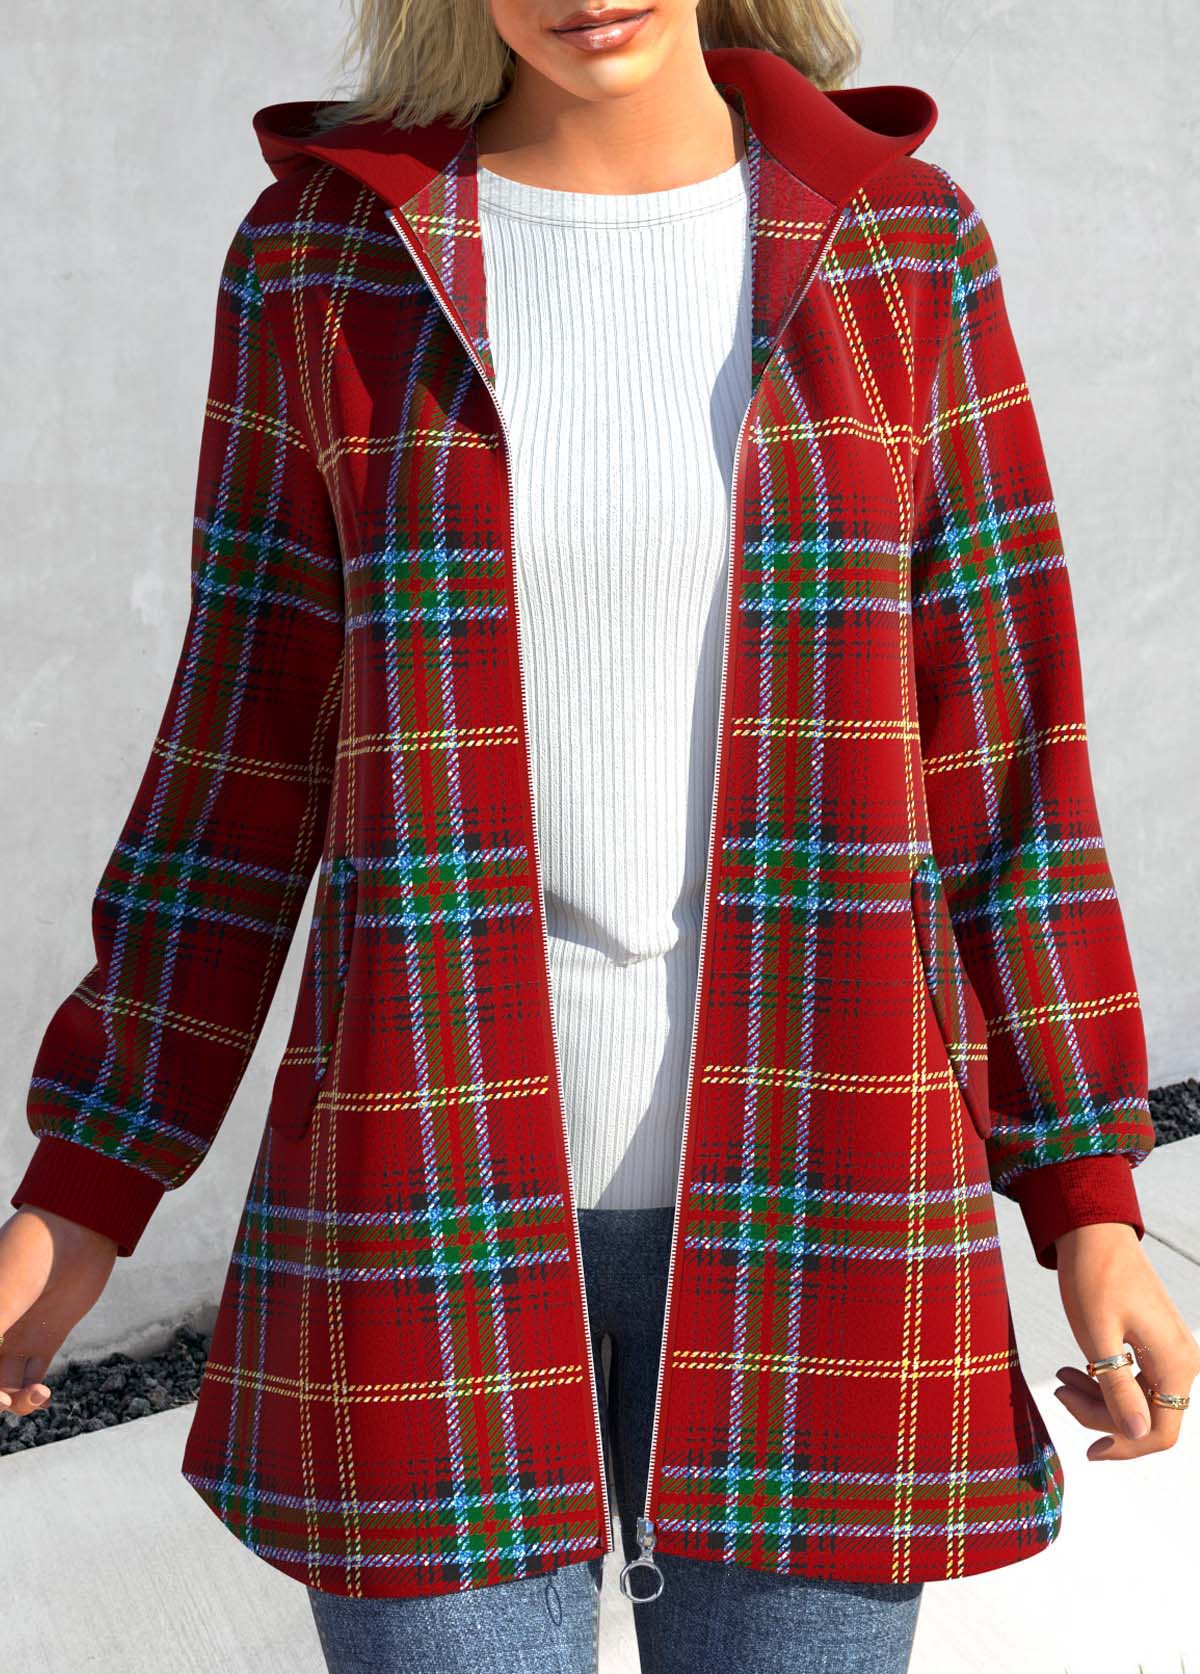 ROTITA Patchwork Plaid Wine Red Hooded Long Sleeve Coat